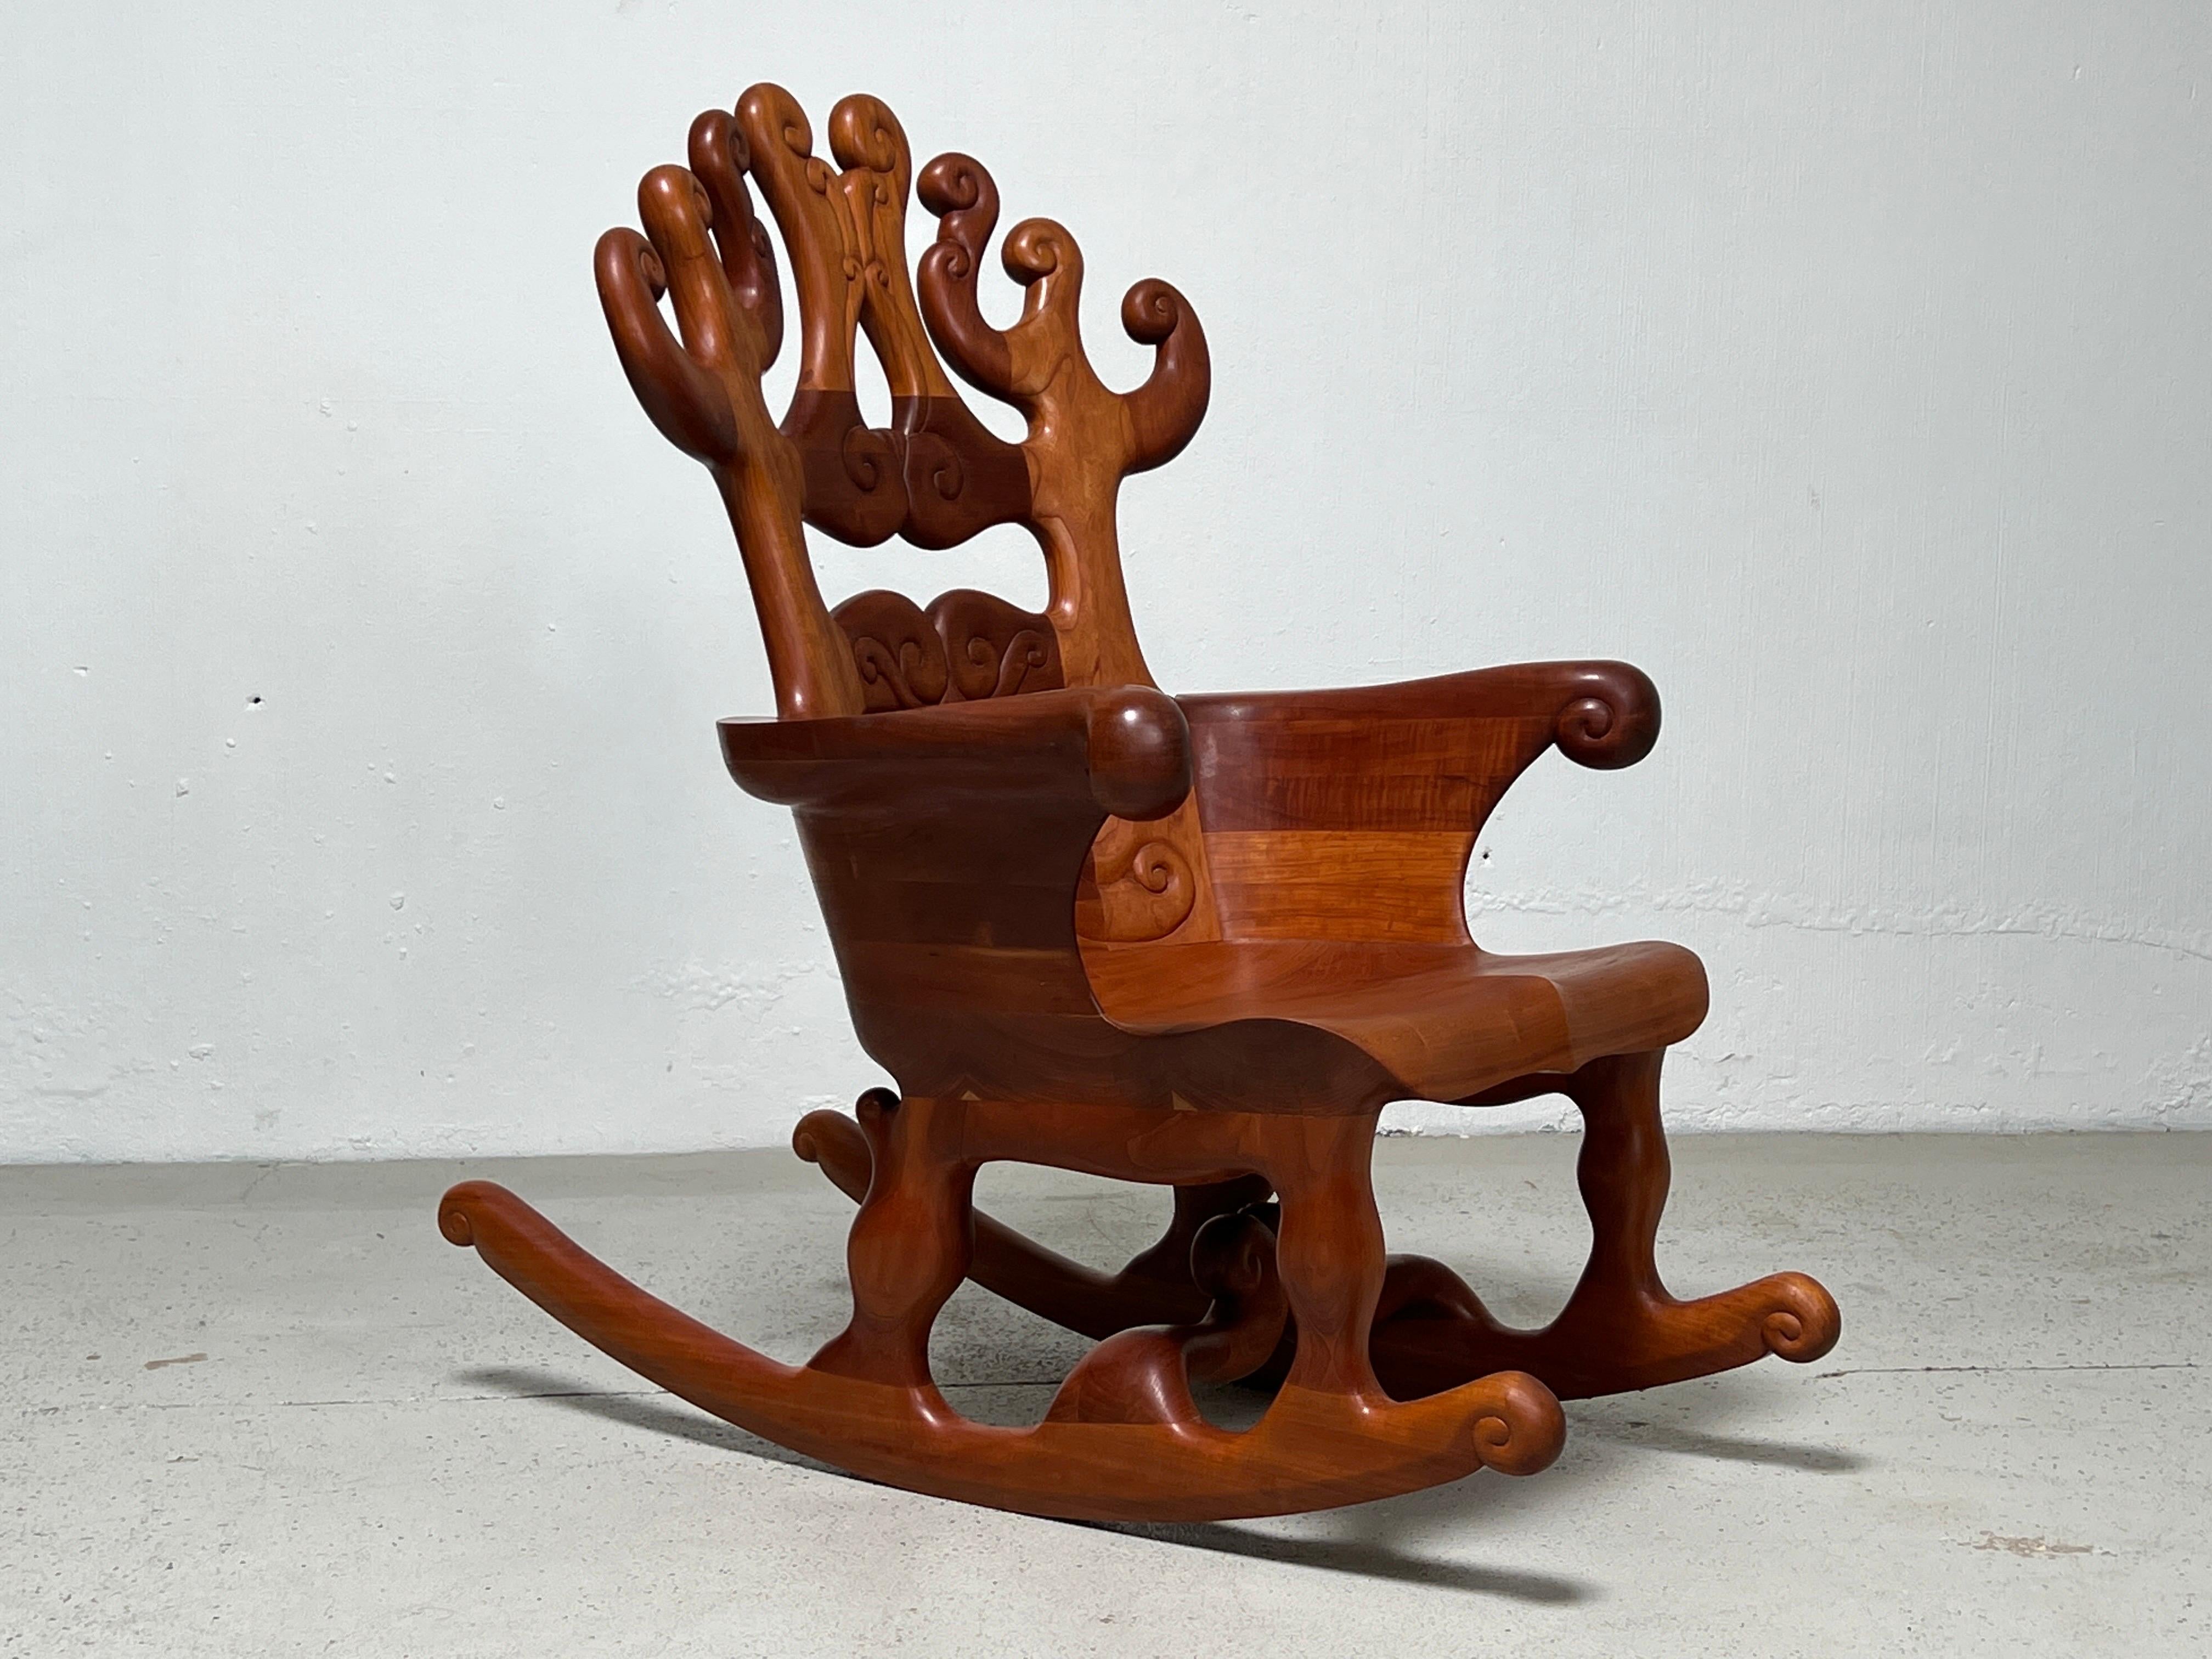 Carved rocking chair by California maker John Bauer. Employing stack-laminate cherry, this rocker represents a fine example of late 20th century studio craft furniture.